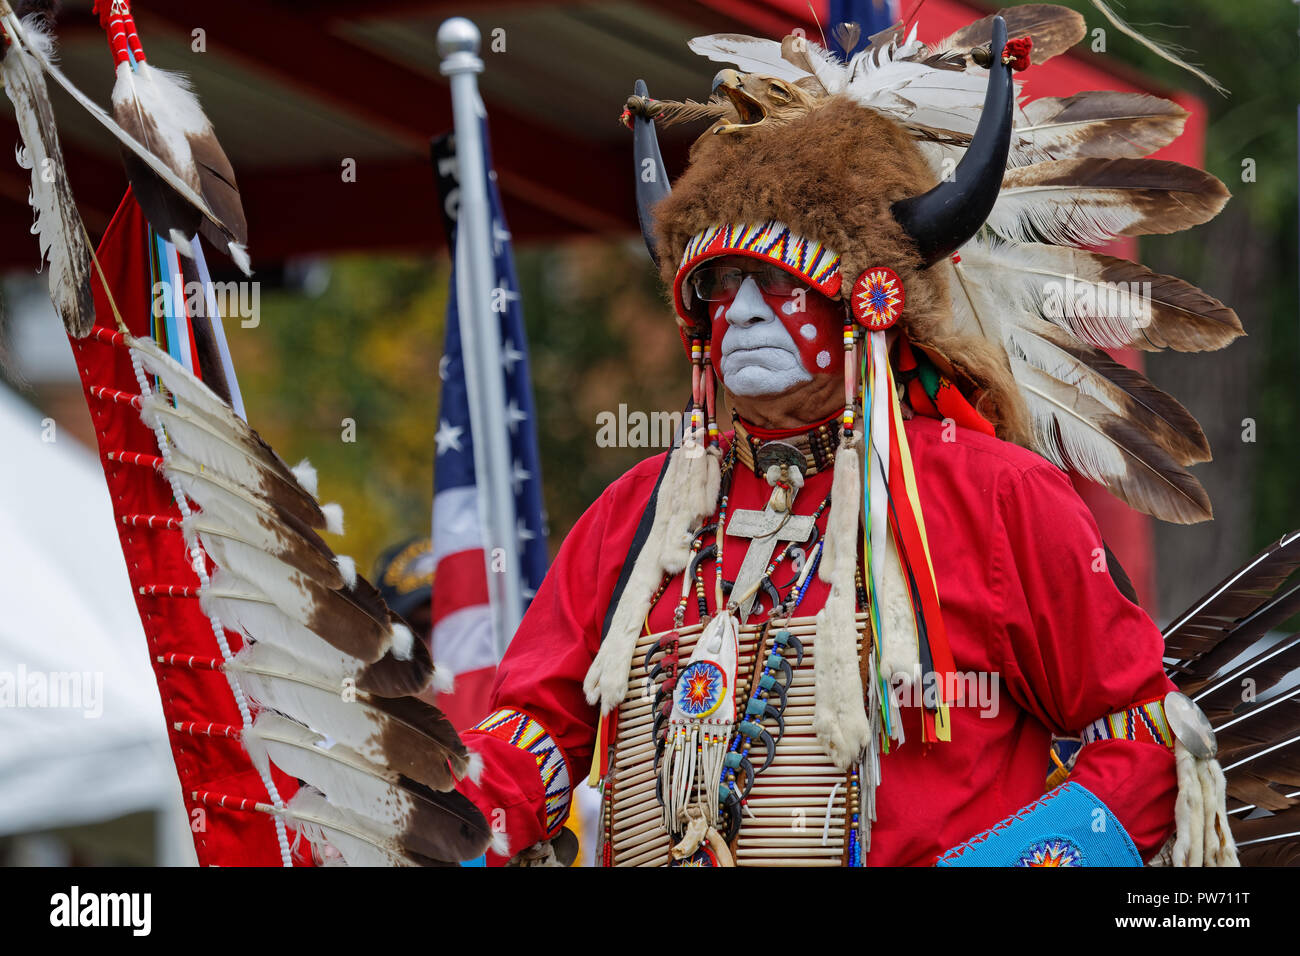 BISMARK, NORTH DAKOTA, September 9, 2018 : A dancer of the 49th annual United Tribes Pow Wow, one large outdoor event that gathers more than 900 dance Stock Photo